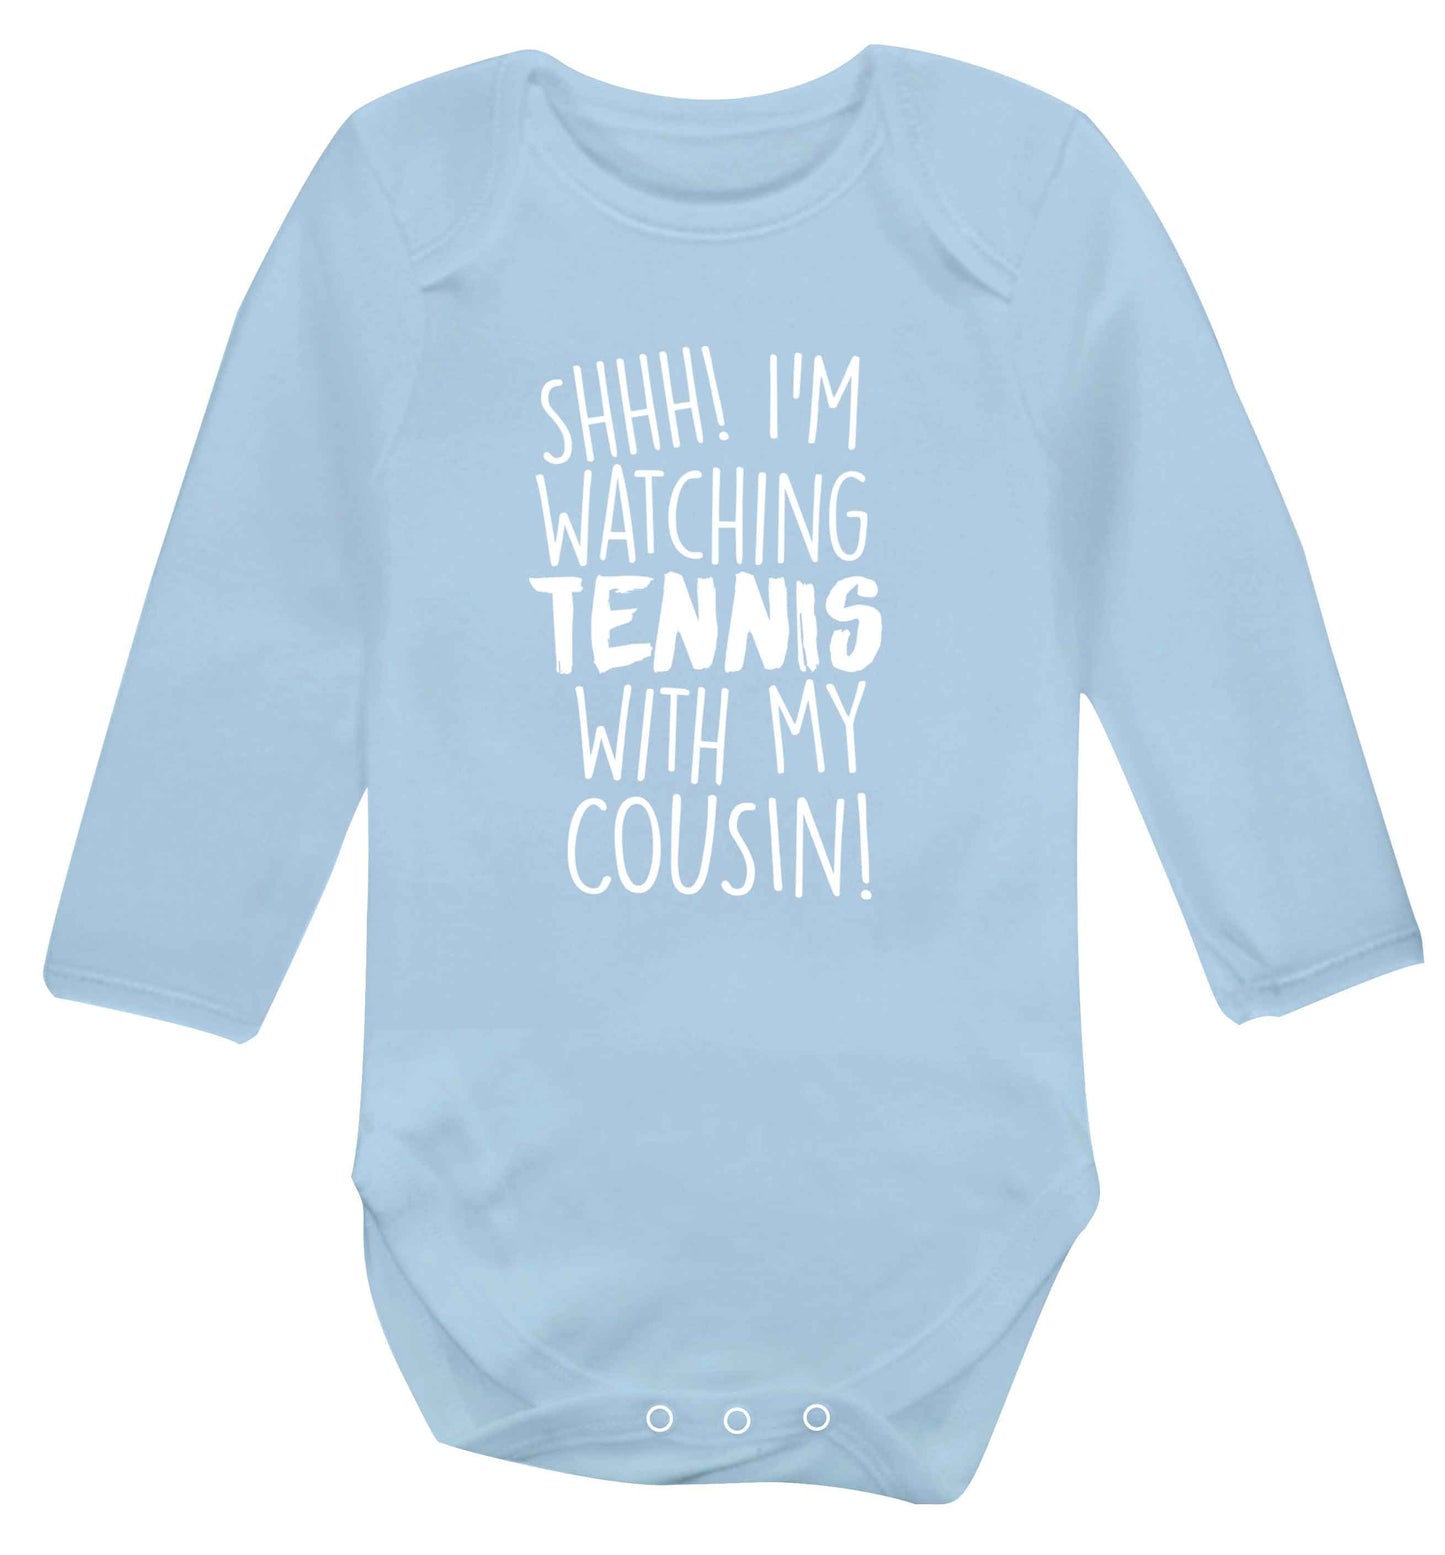 Shh! I'm watching tennis with my cousin! Baby Vest long sleeved pale blue 6-12 months